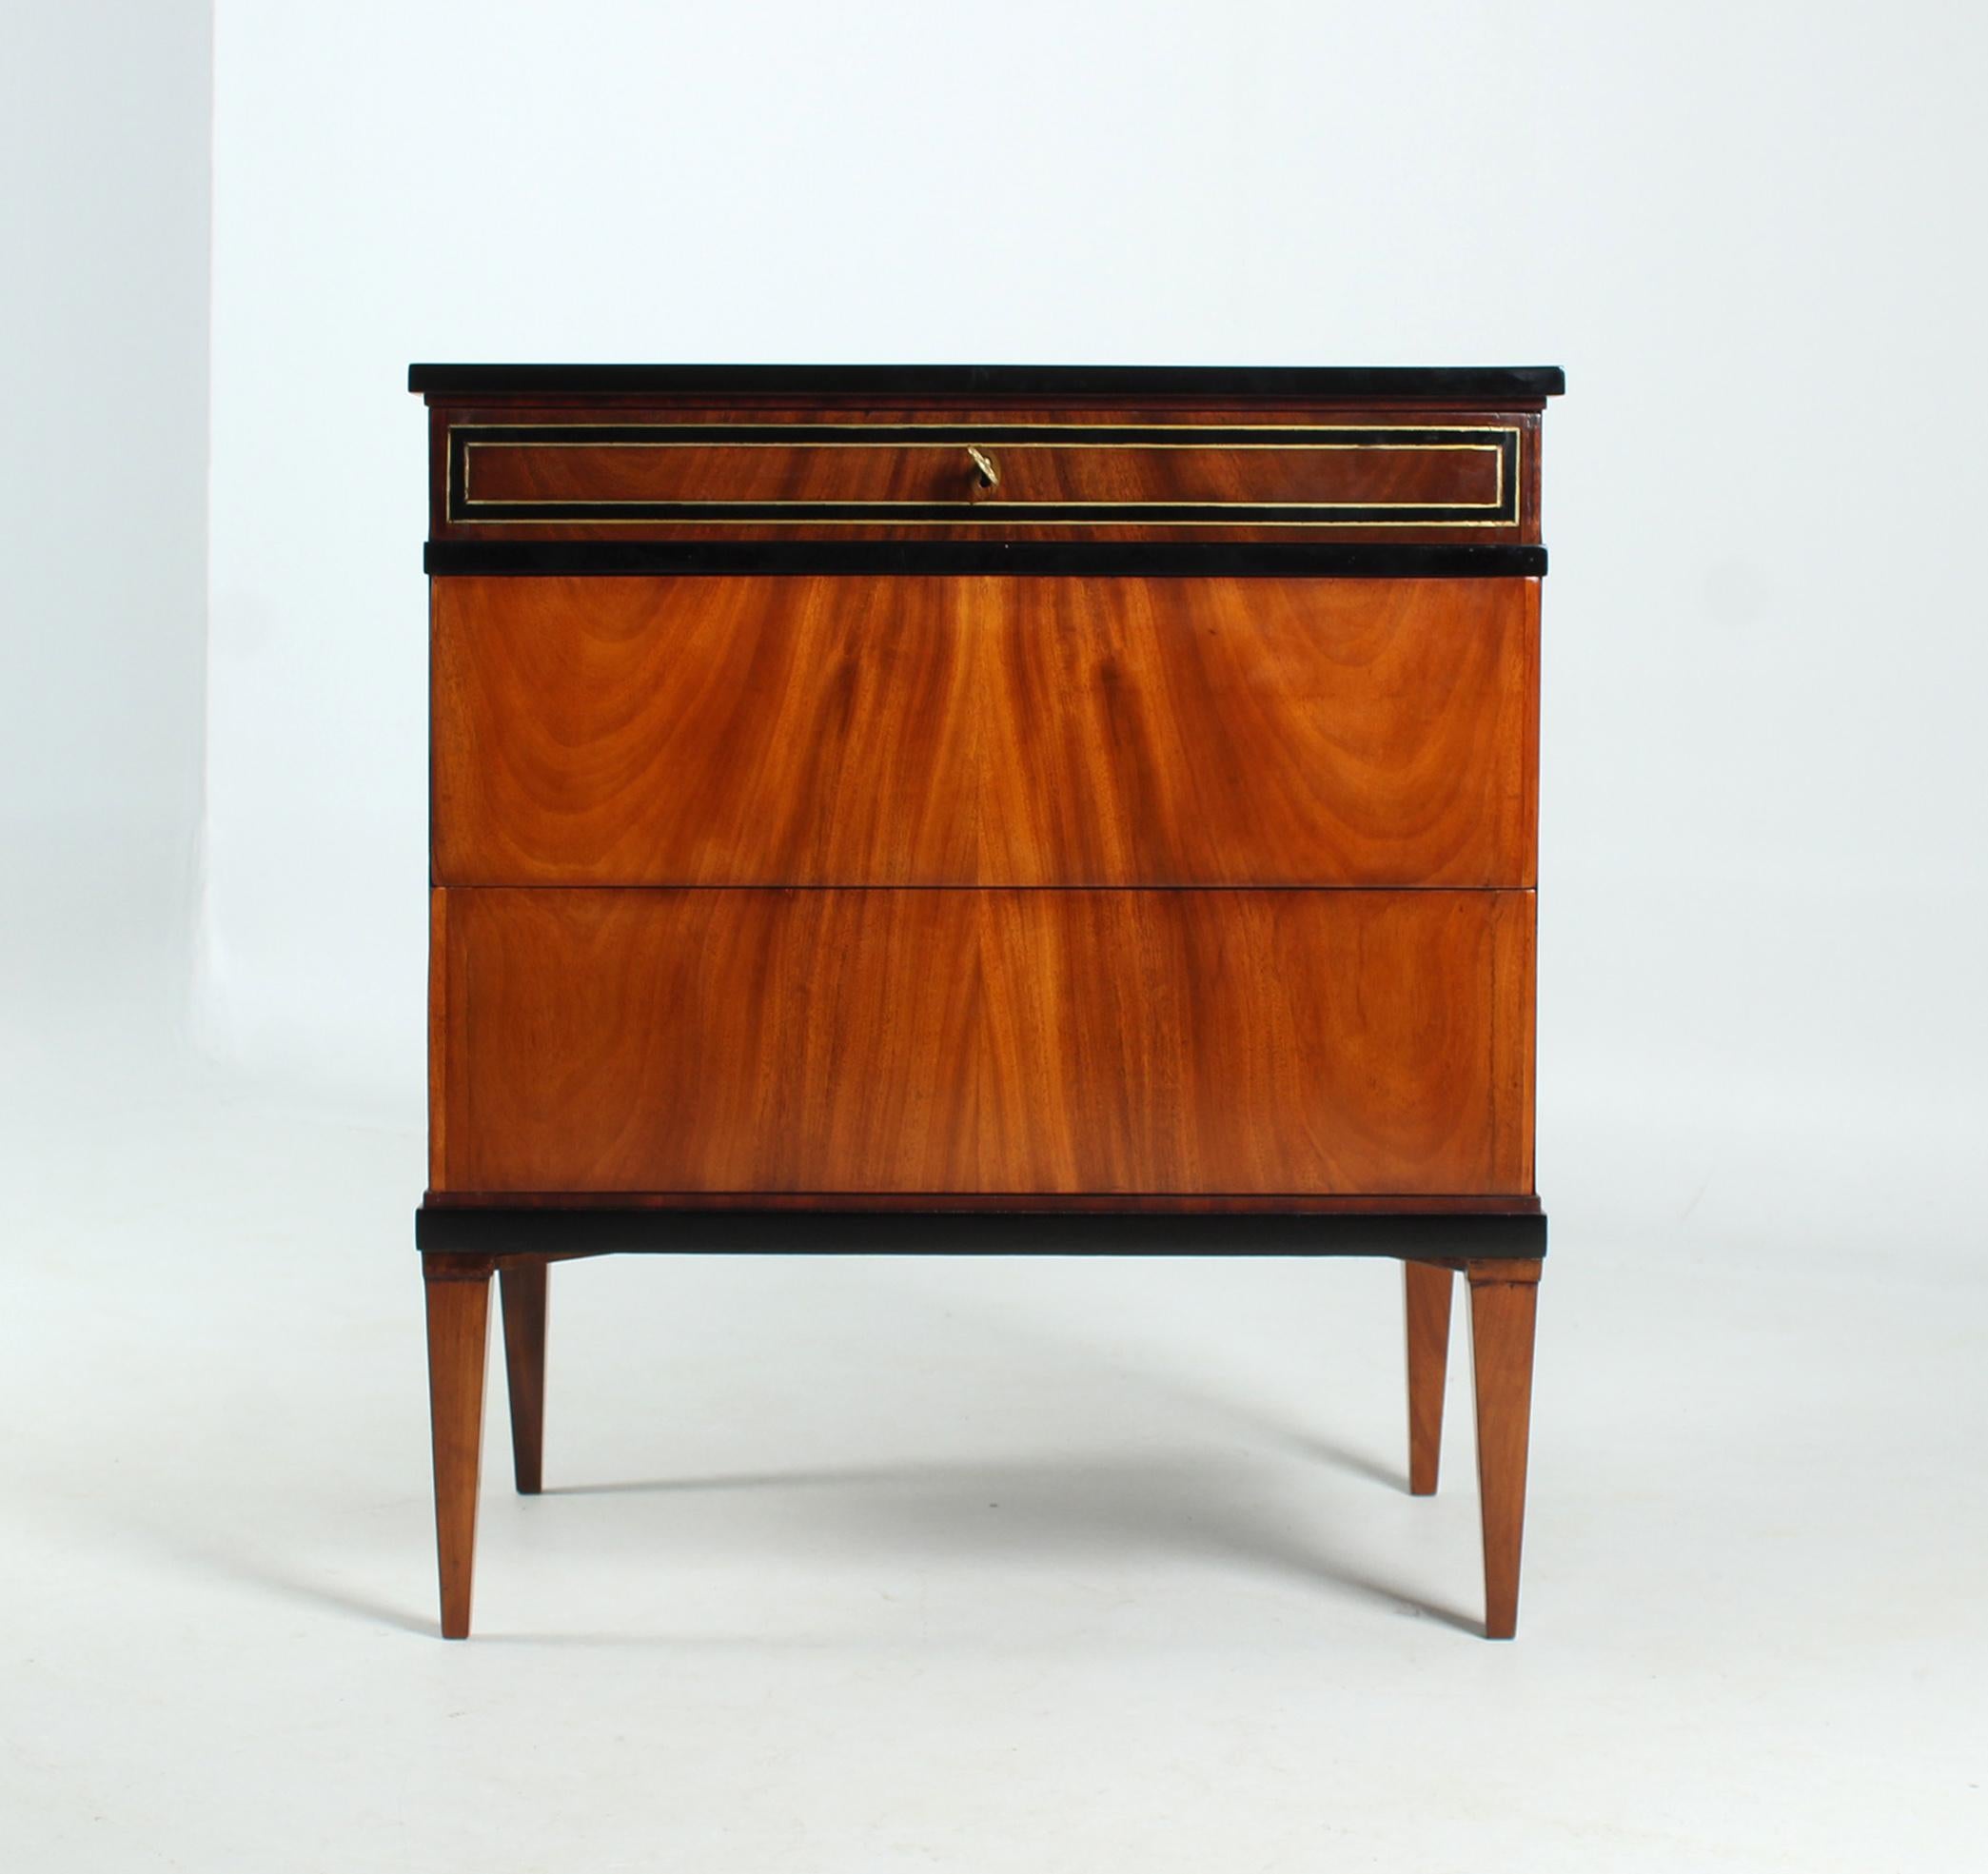 Small antique Biedermeier commode with trick lock

West Germany
early 19th century

Dimensions: H x W x D: 83 x 74 x 47 cm

Description:
Strictly cubist, three-bay piece of furniture standing on pointed feet.

We see a very calm, simply